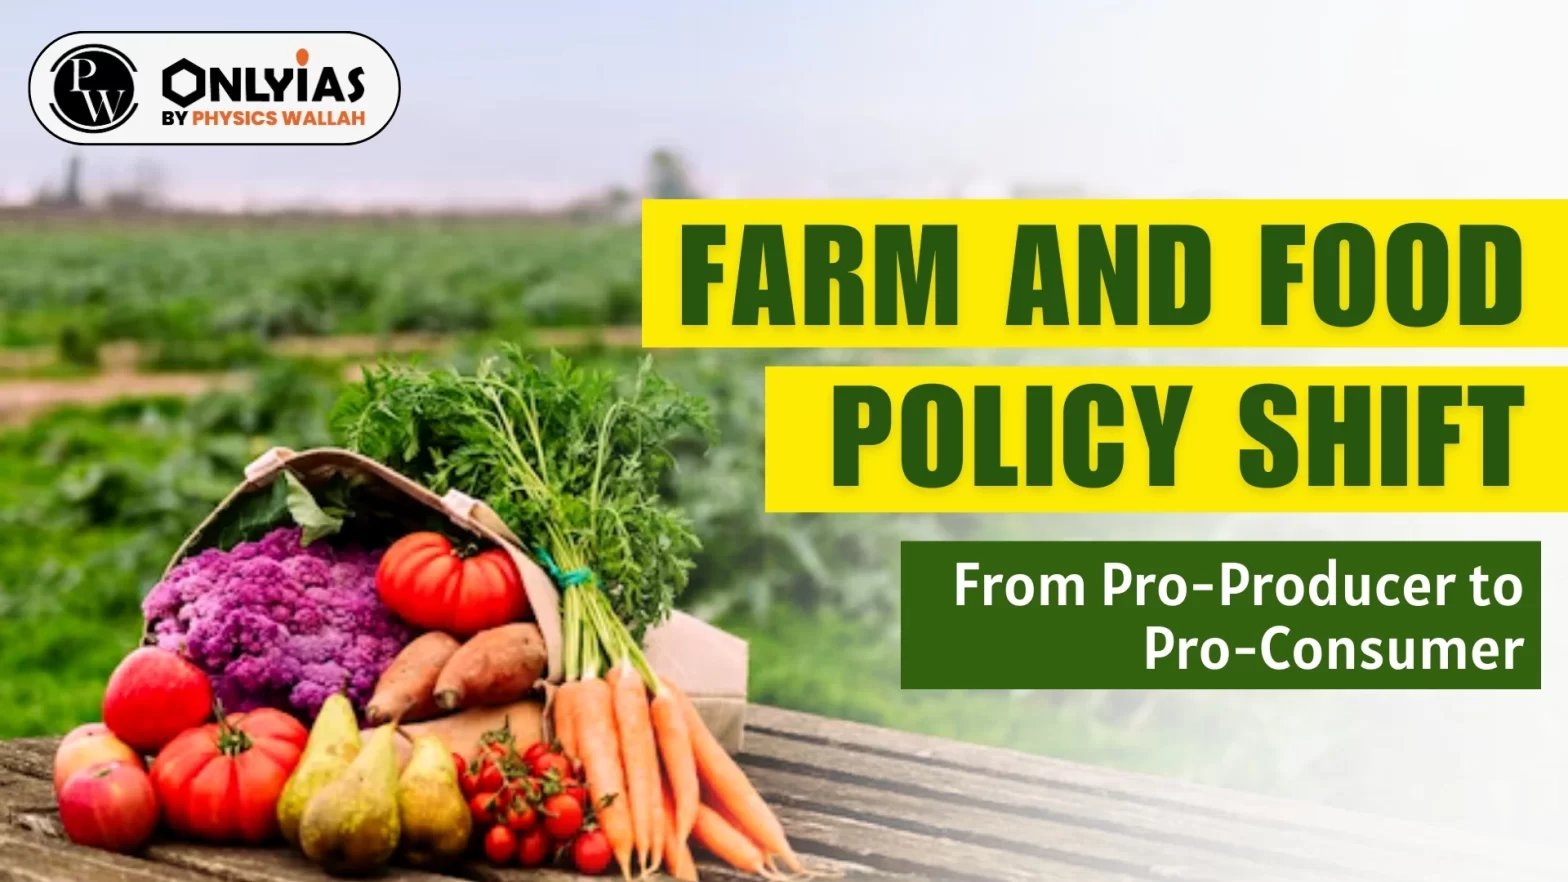 Farm and Food Policy Shift: From Pro-Producer to Pro-Consumer